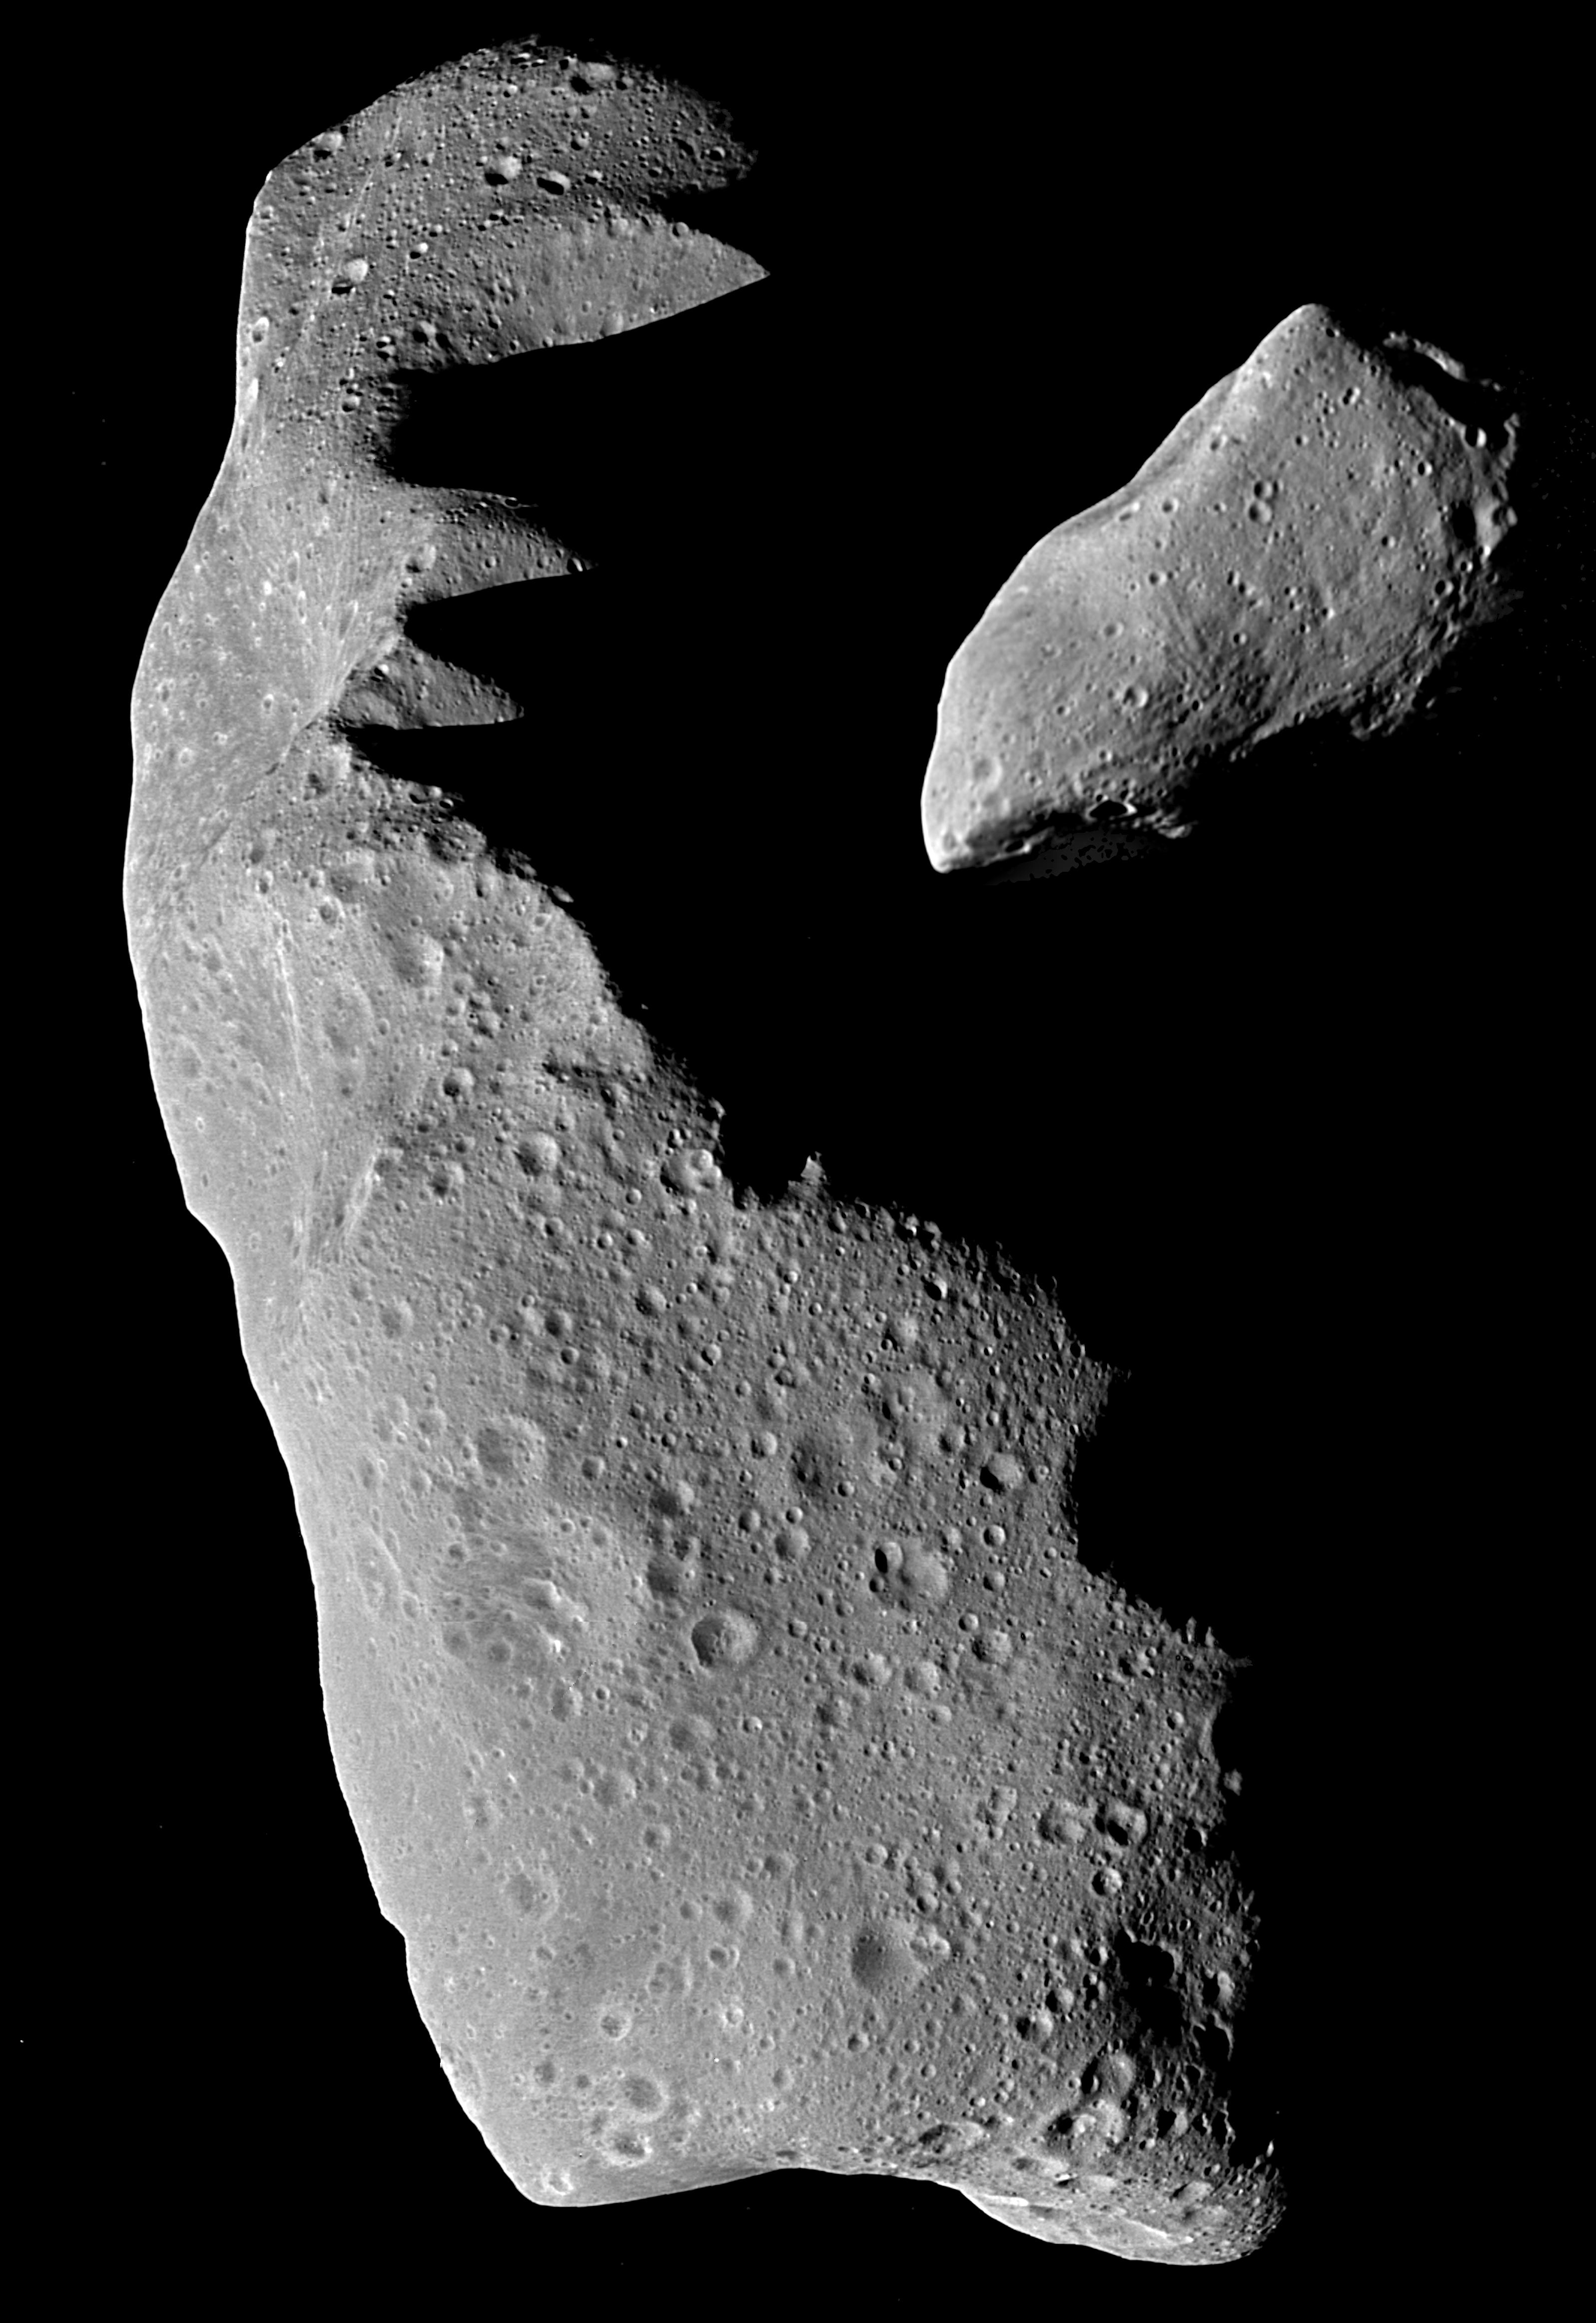 Image of asteroids Ida and Gastra